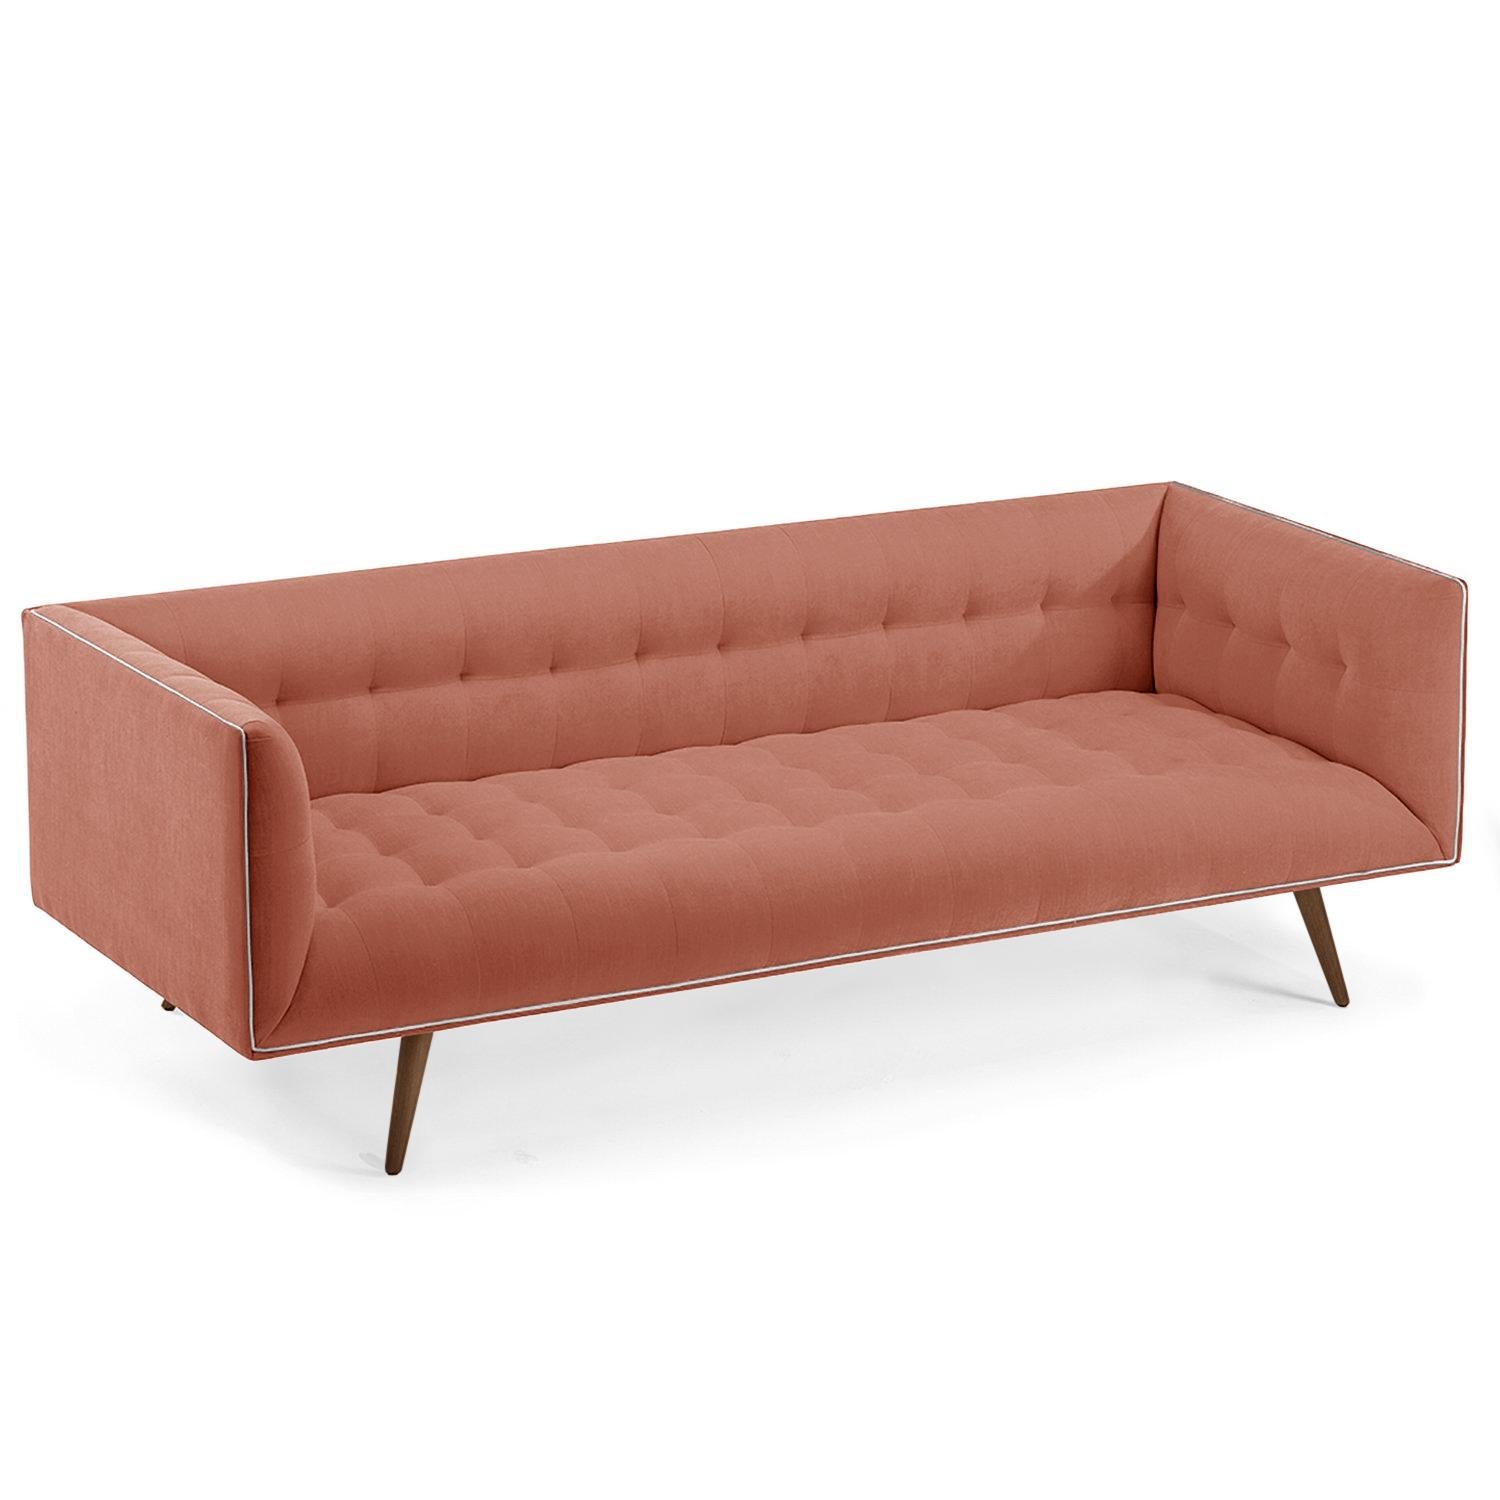 Portuguese Dust Sofa, Medium with Beech Brown For Sale